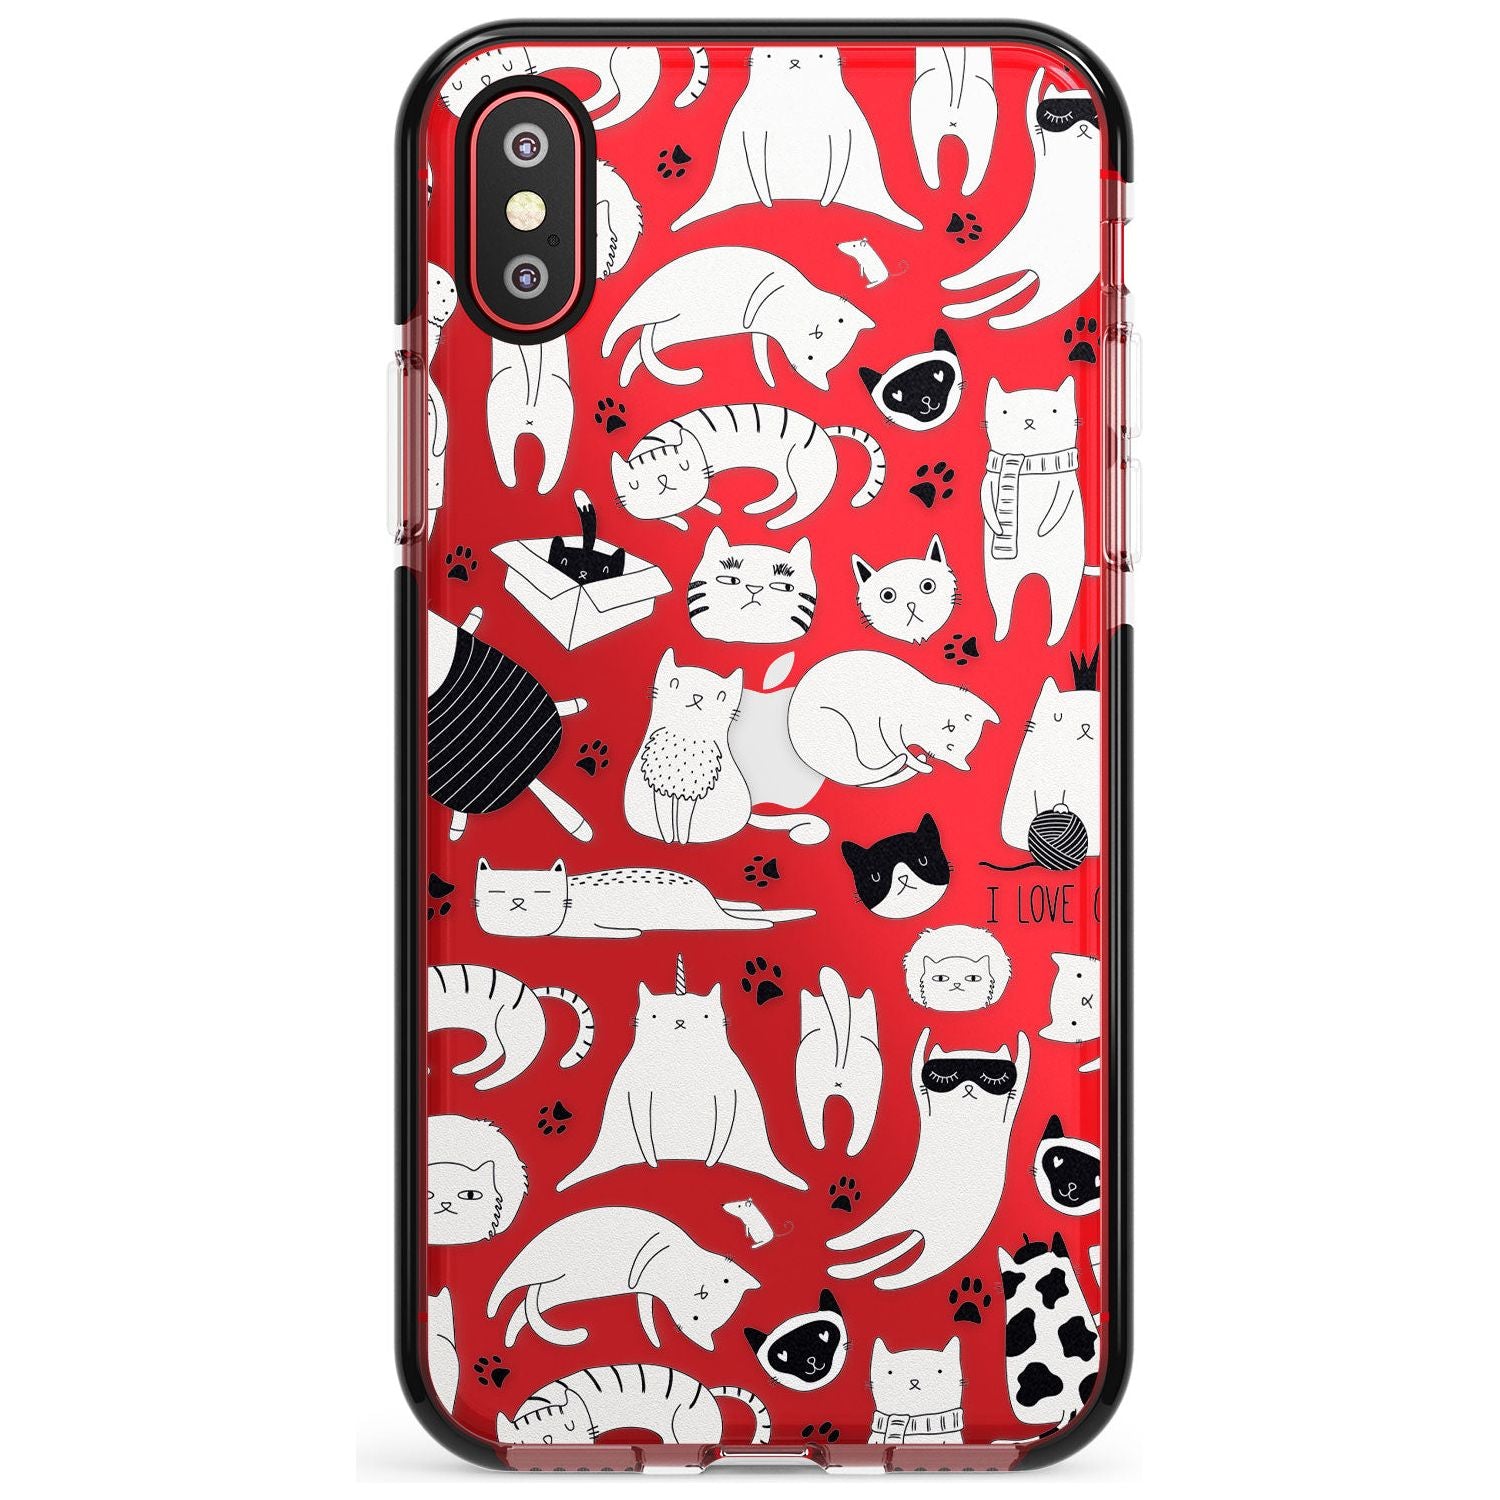 Cartoon Cat Collage - Black & White Pink Fade Impact Phone Case for iPhone X XS Max XR